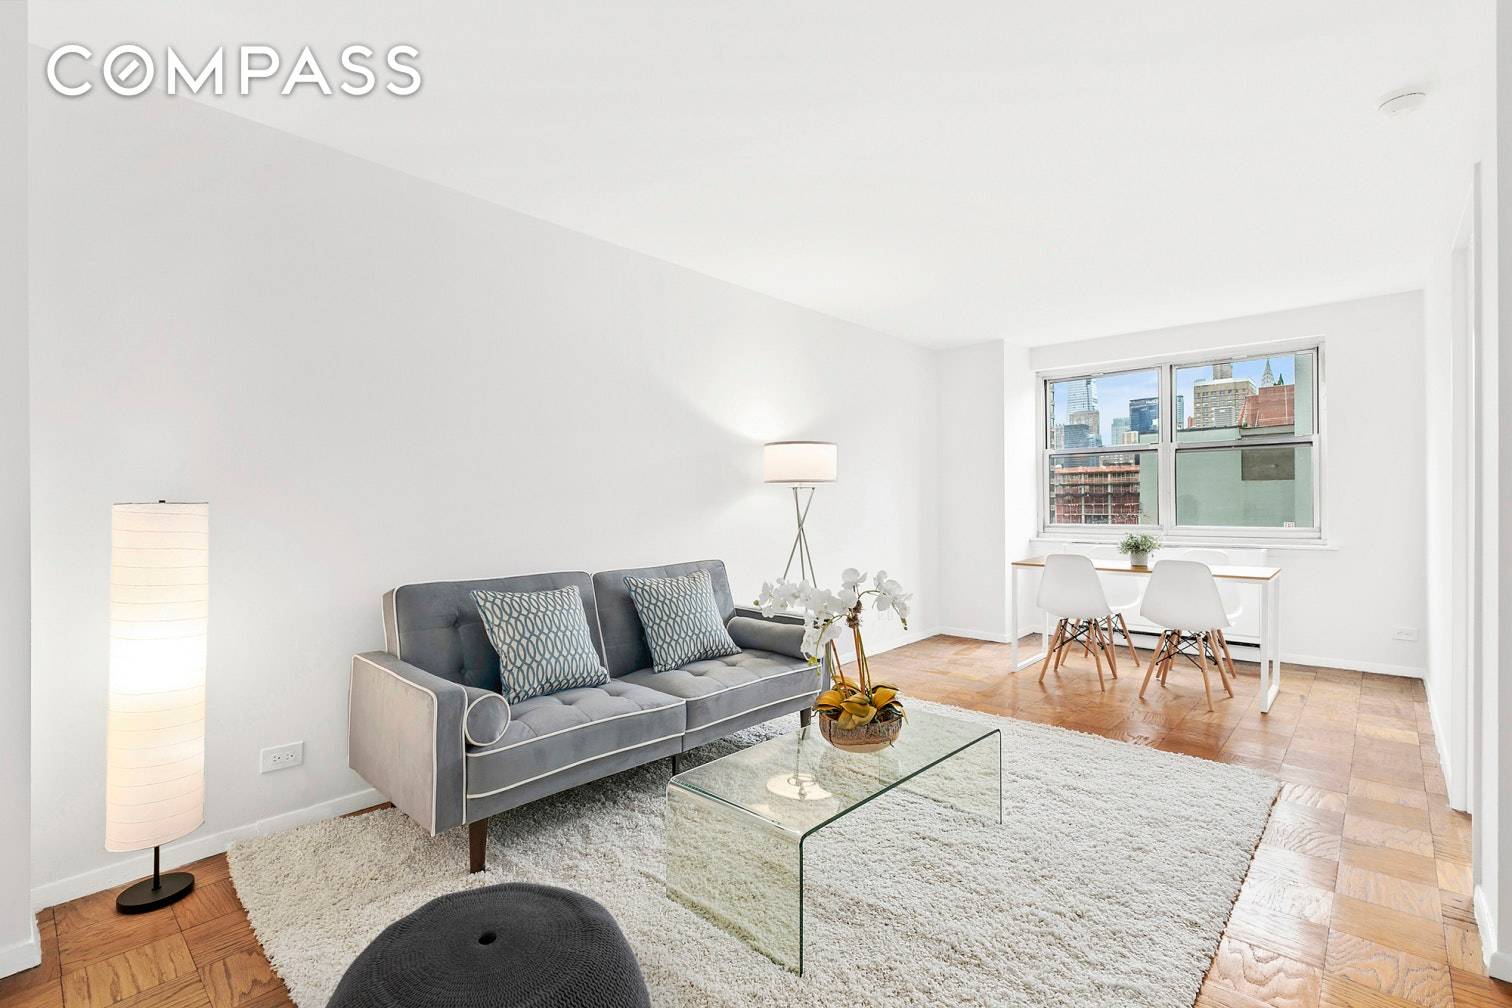 Nestled just a few blocks from Gramercy Park, unit 1507 is a charming 1 bedroom, 1 bathroom co op ready to be transformed into a true city gem.